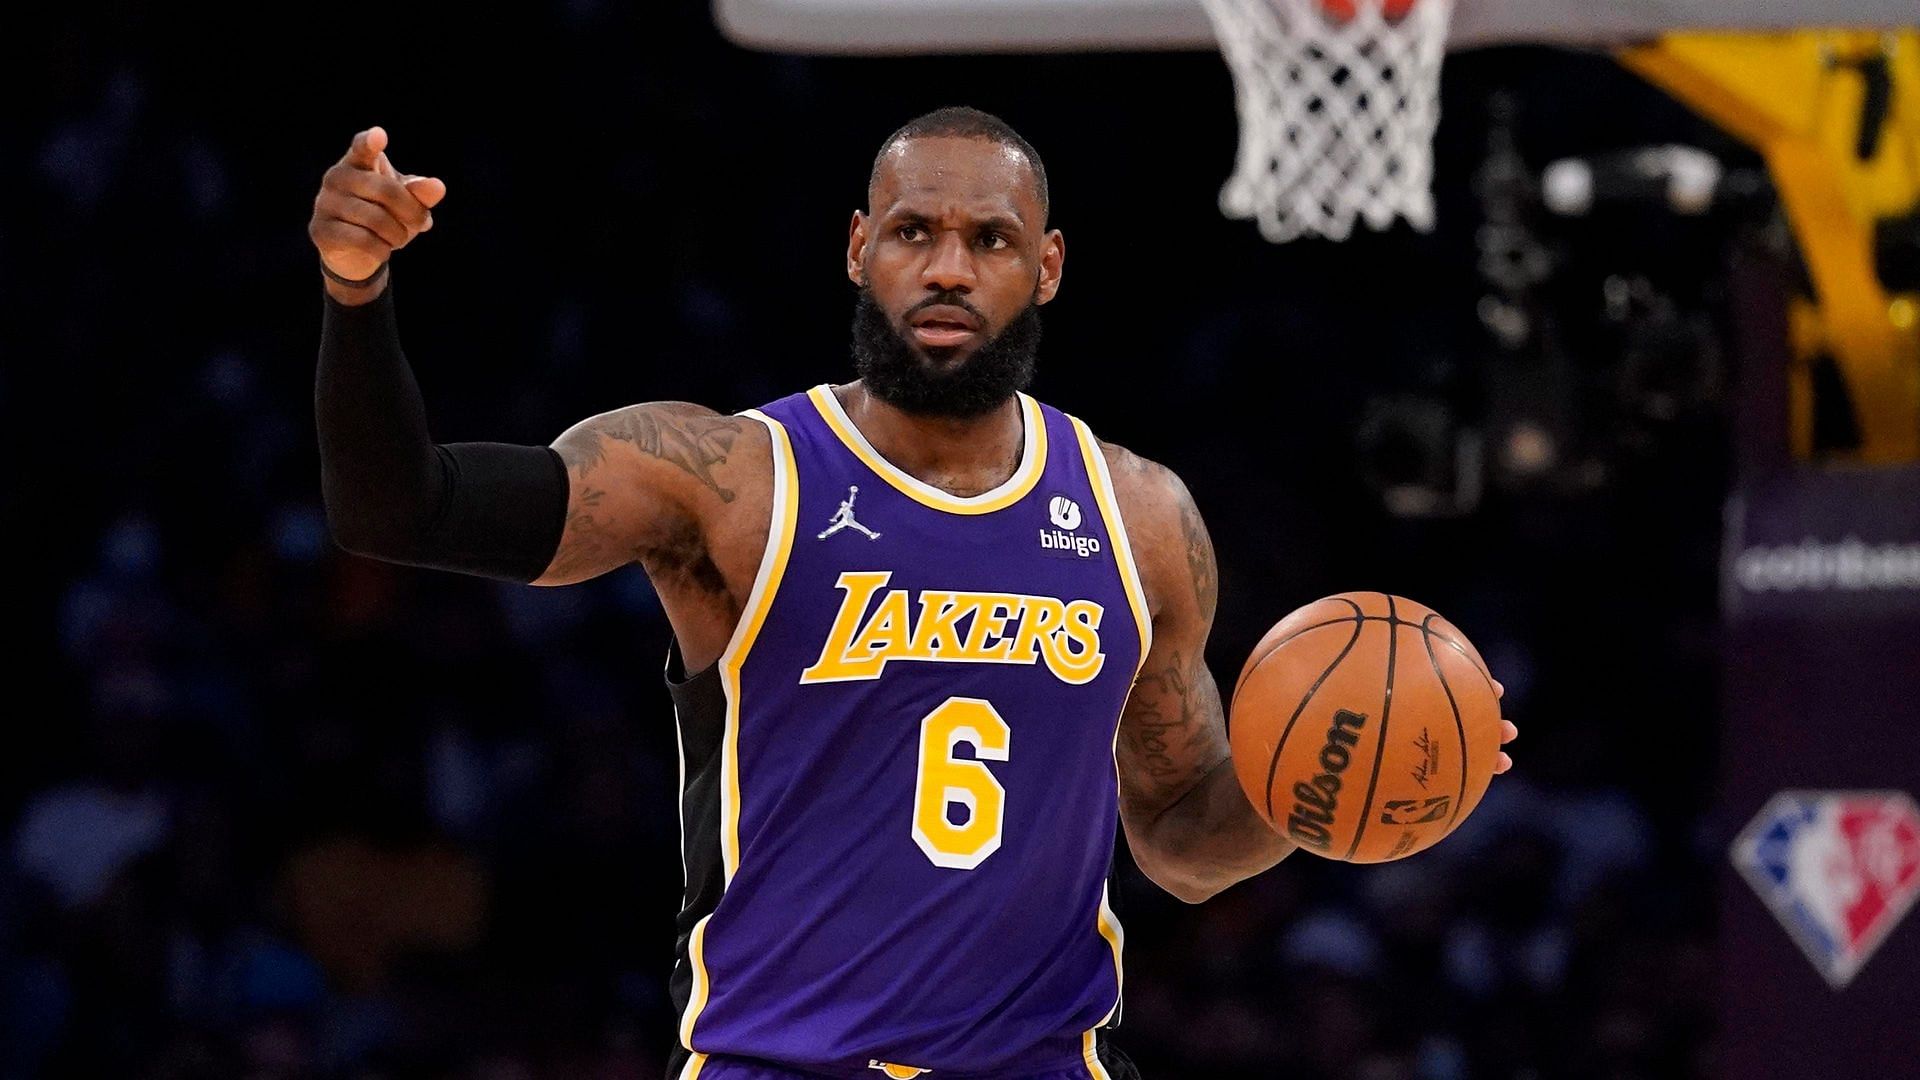 LeBron James is hoping never to miss the playoffs again. [Photo: Forbes]